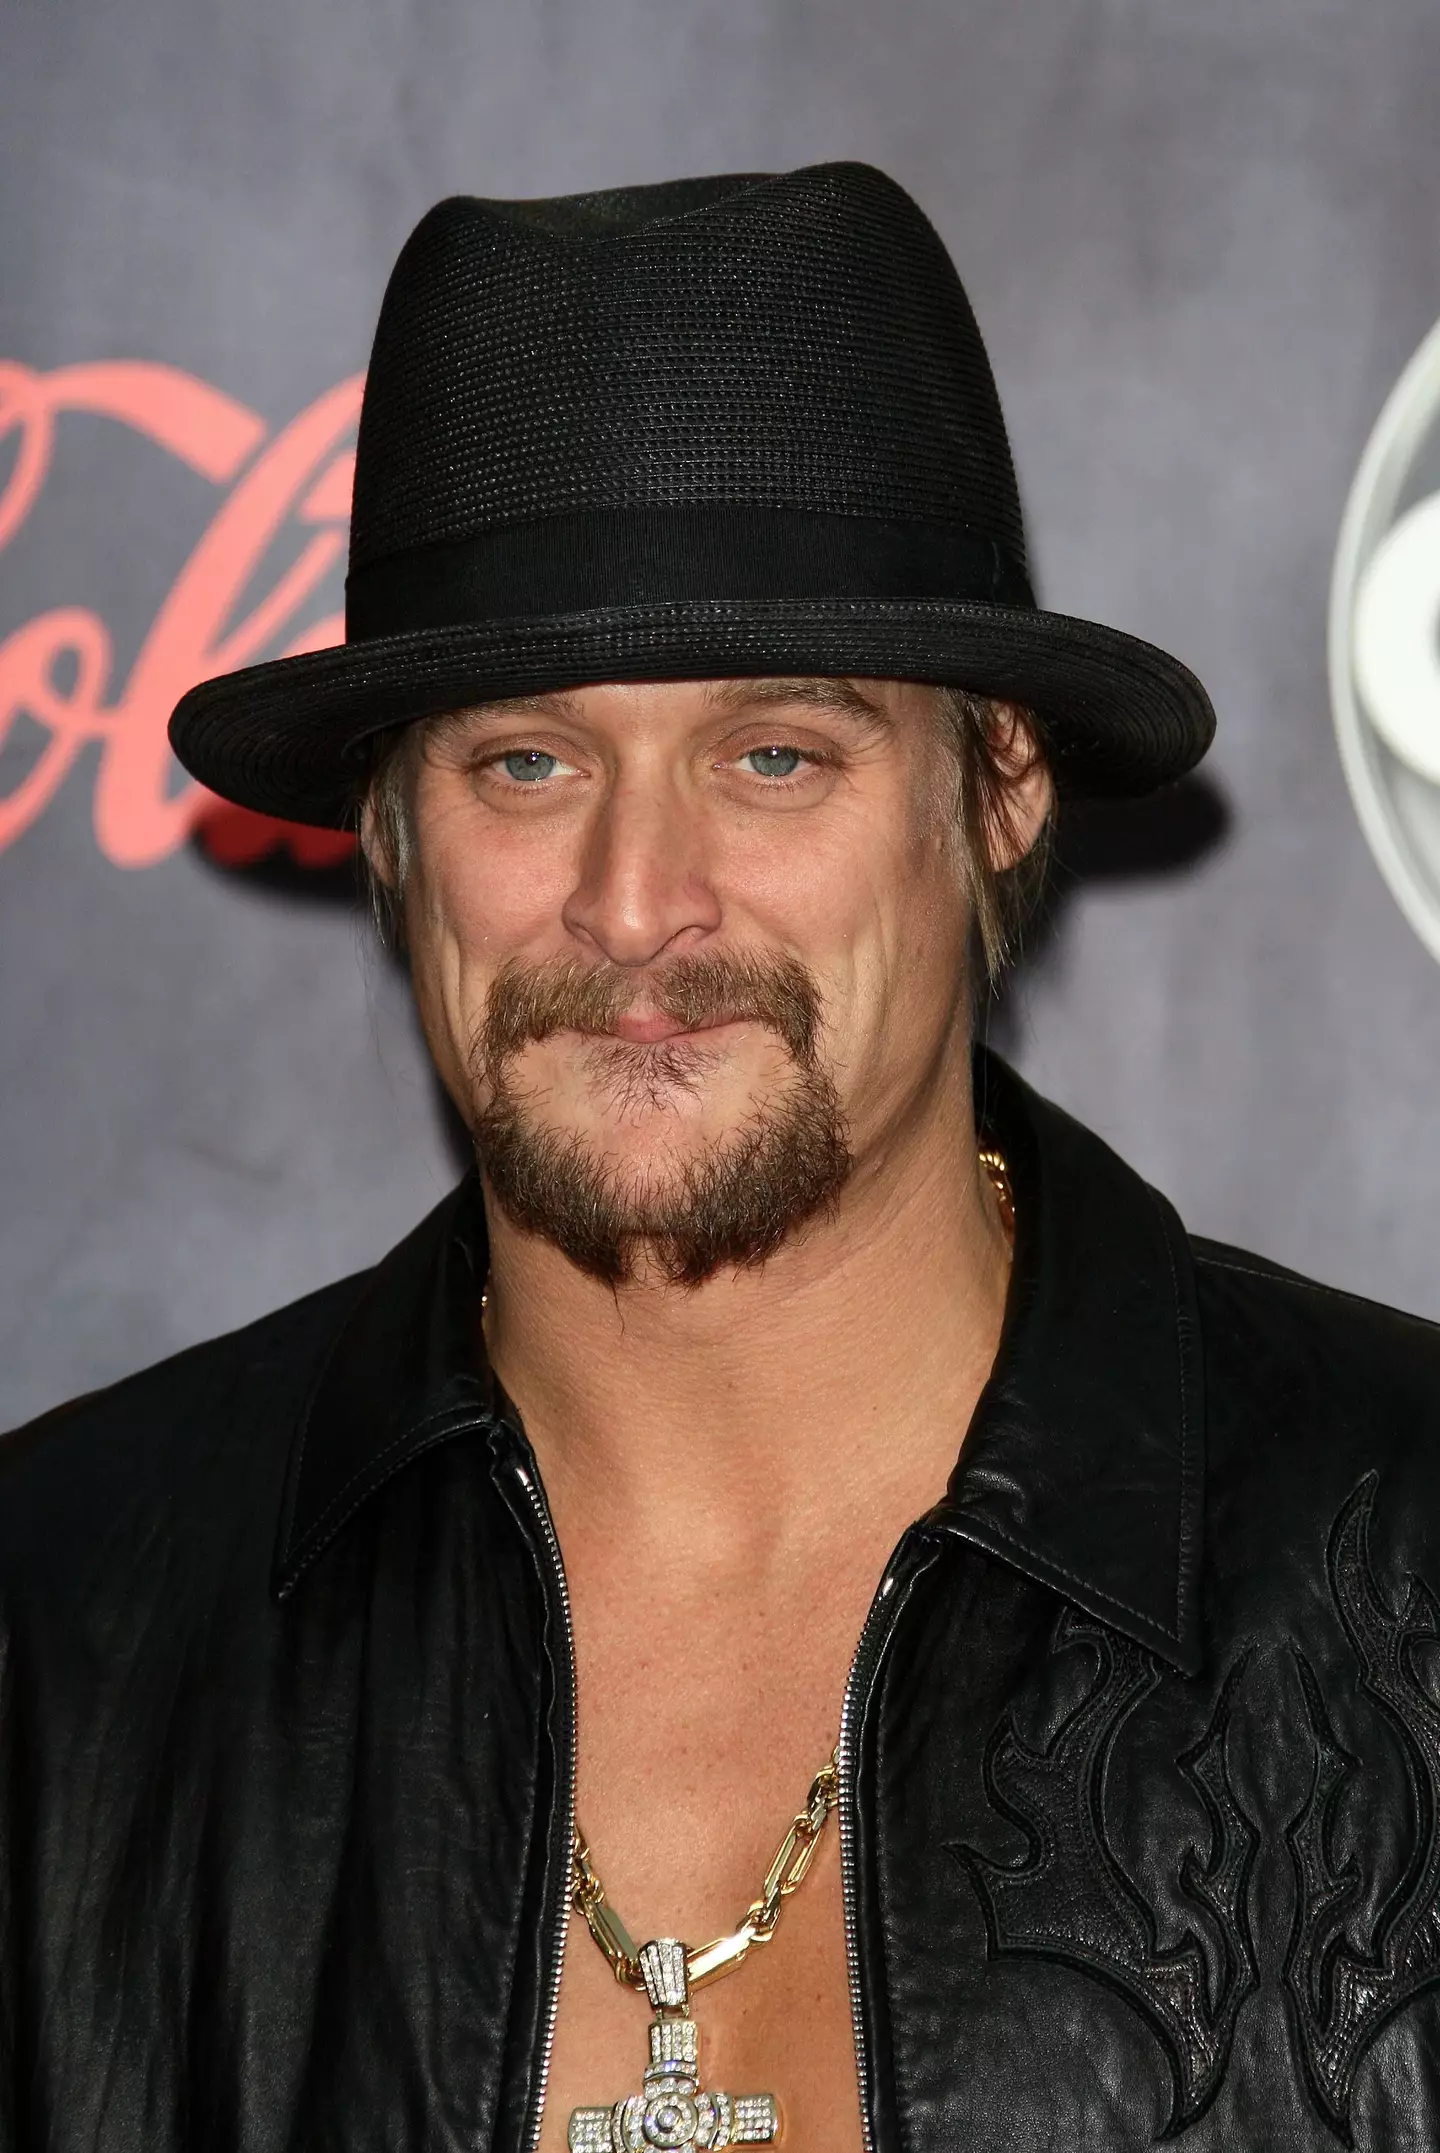 Kid Rock donated $5000 to the controversial fund.